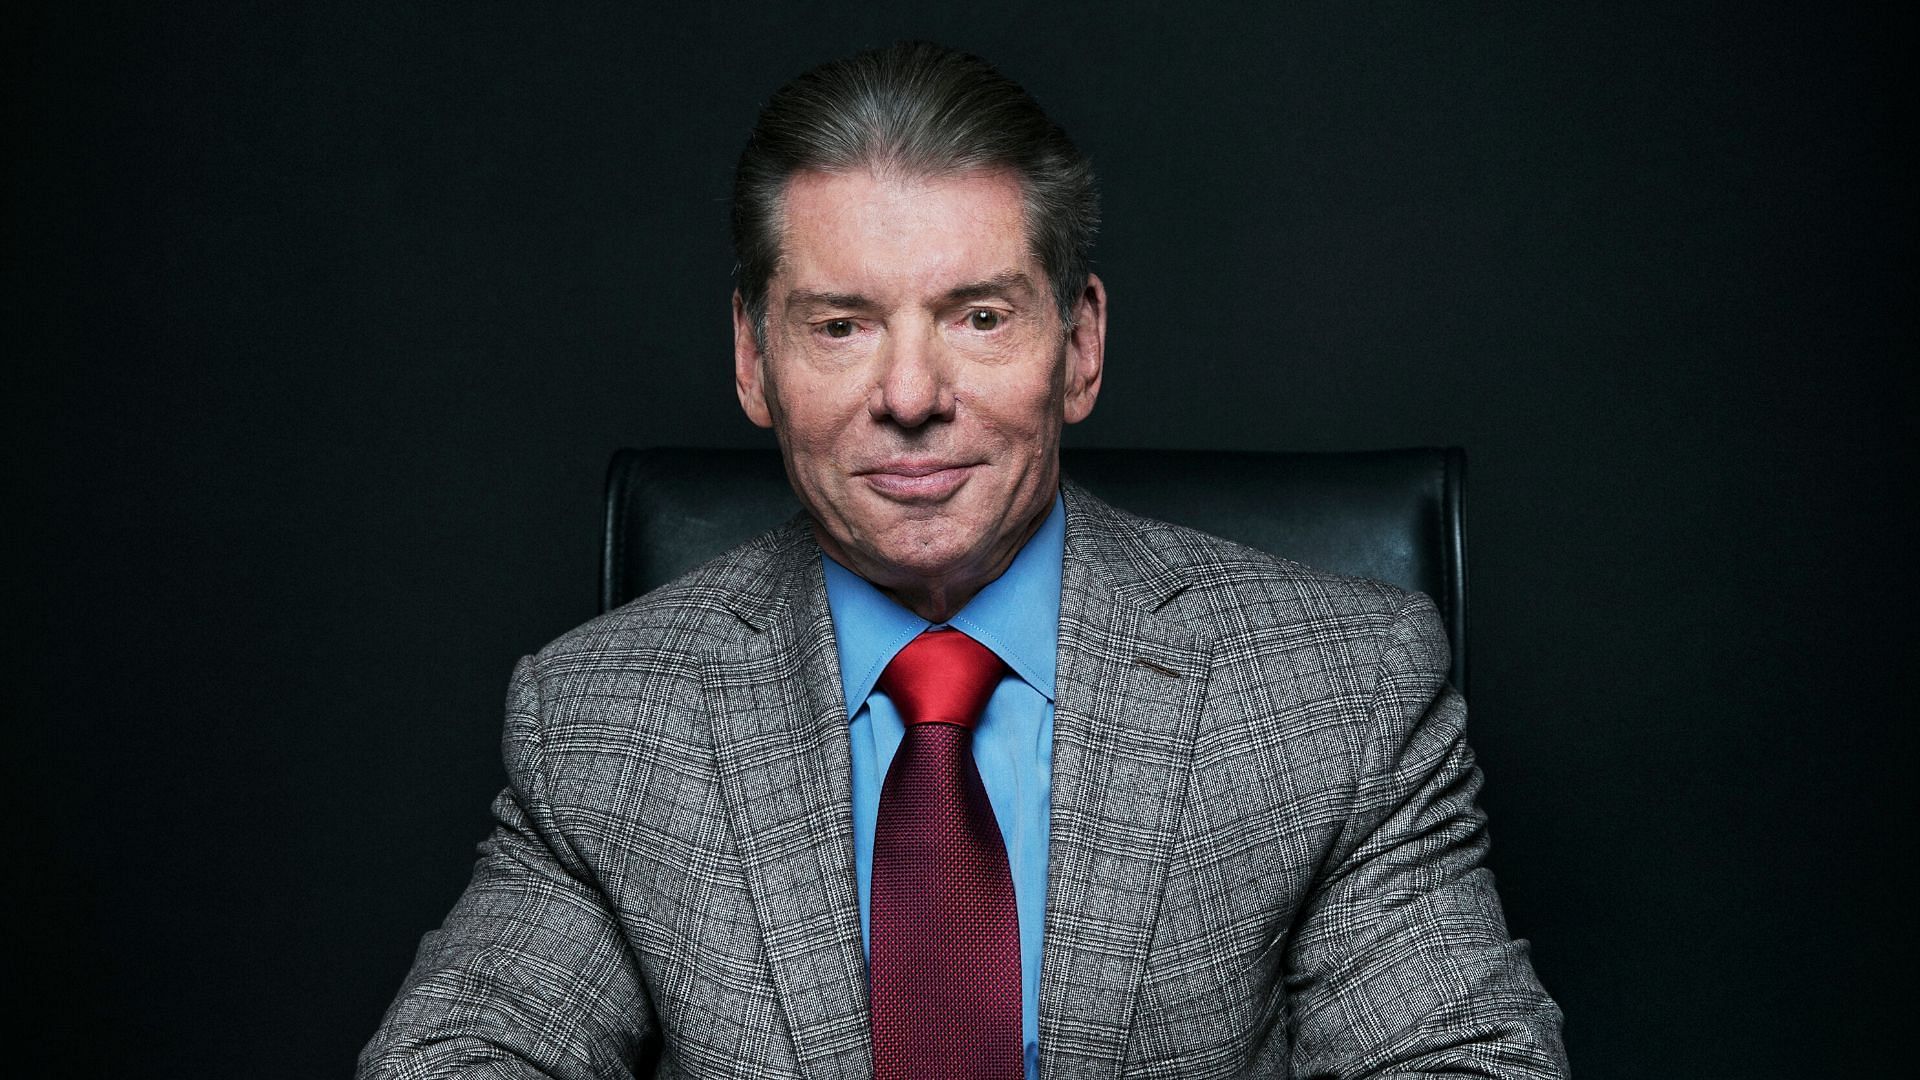 Vince McMahon retired from WWE last month.